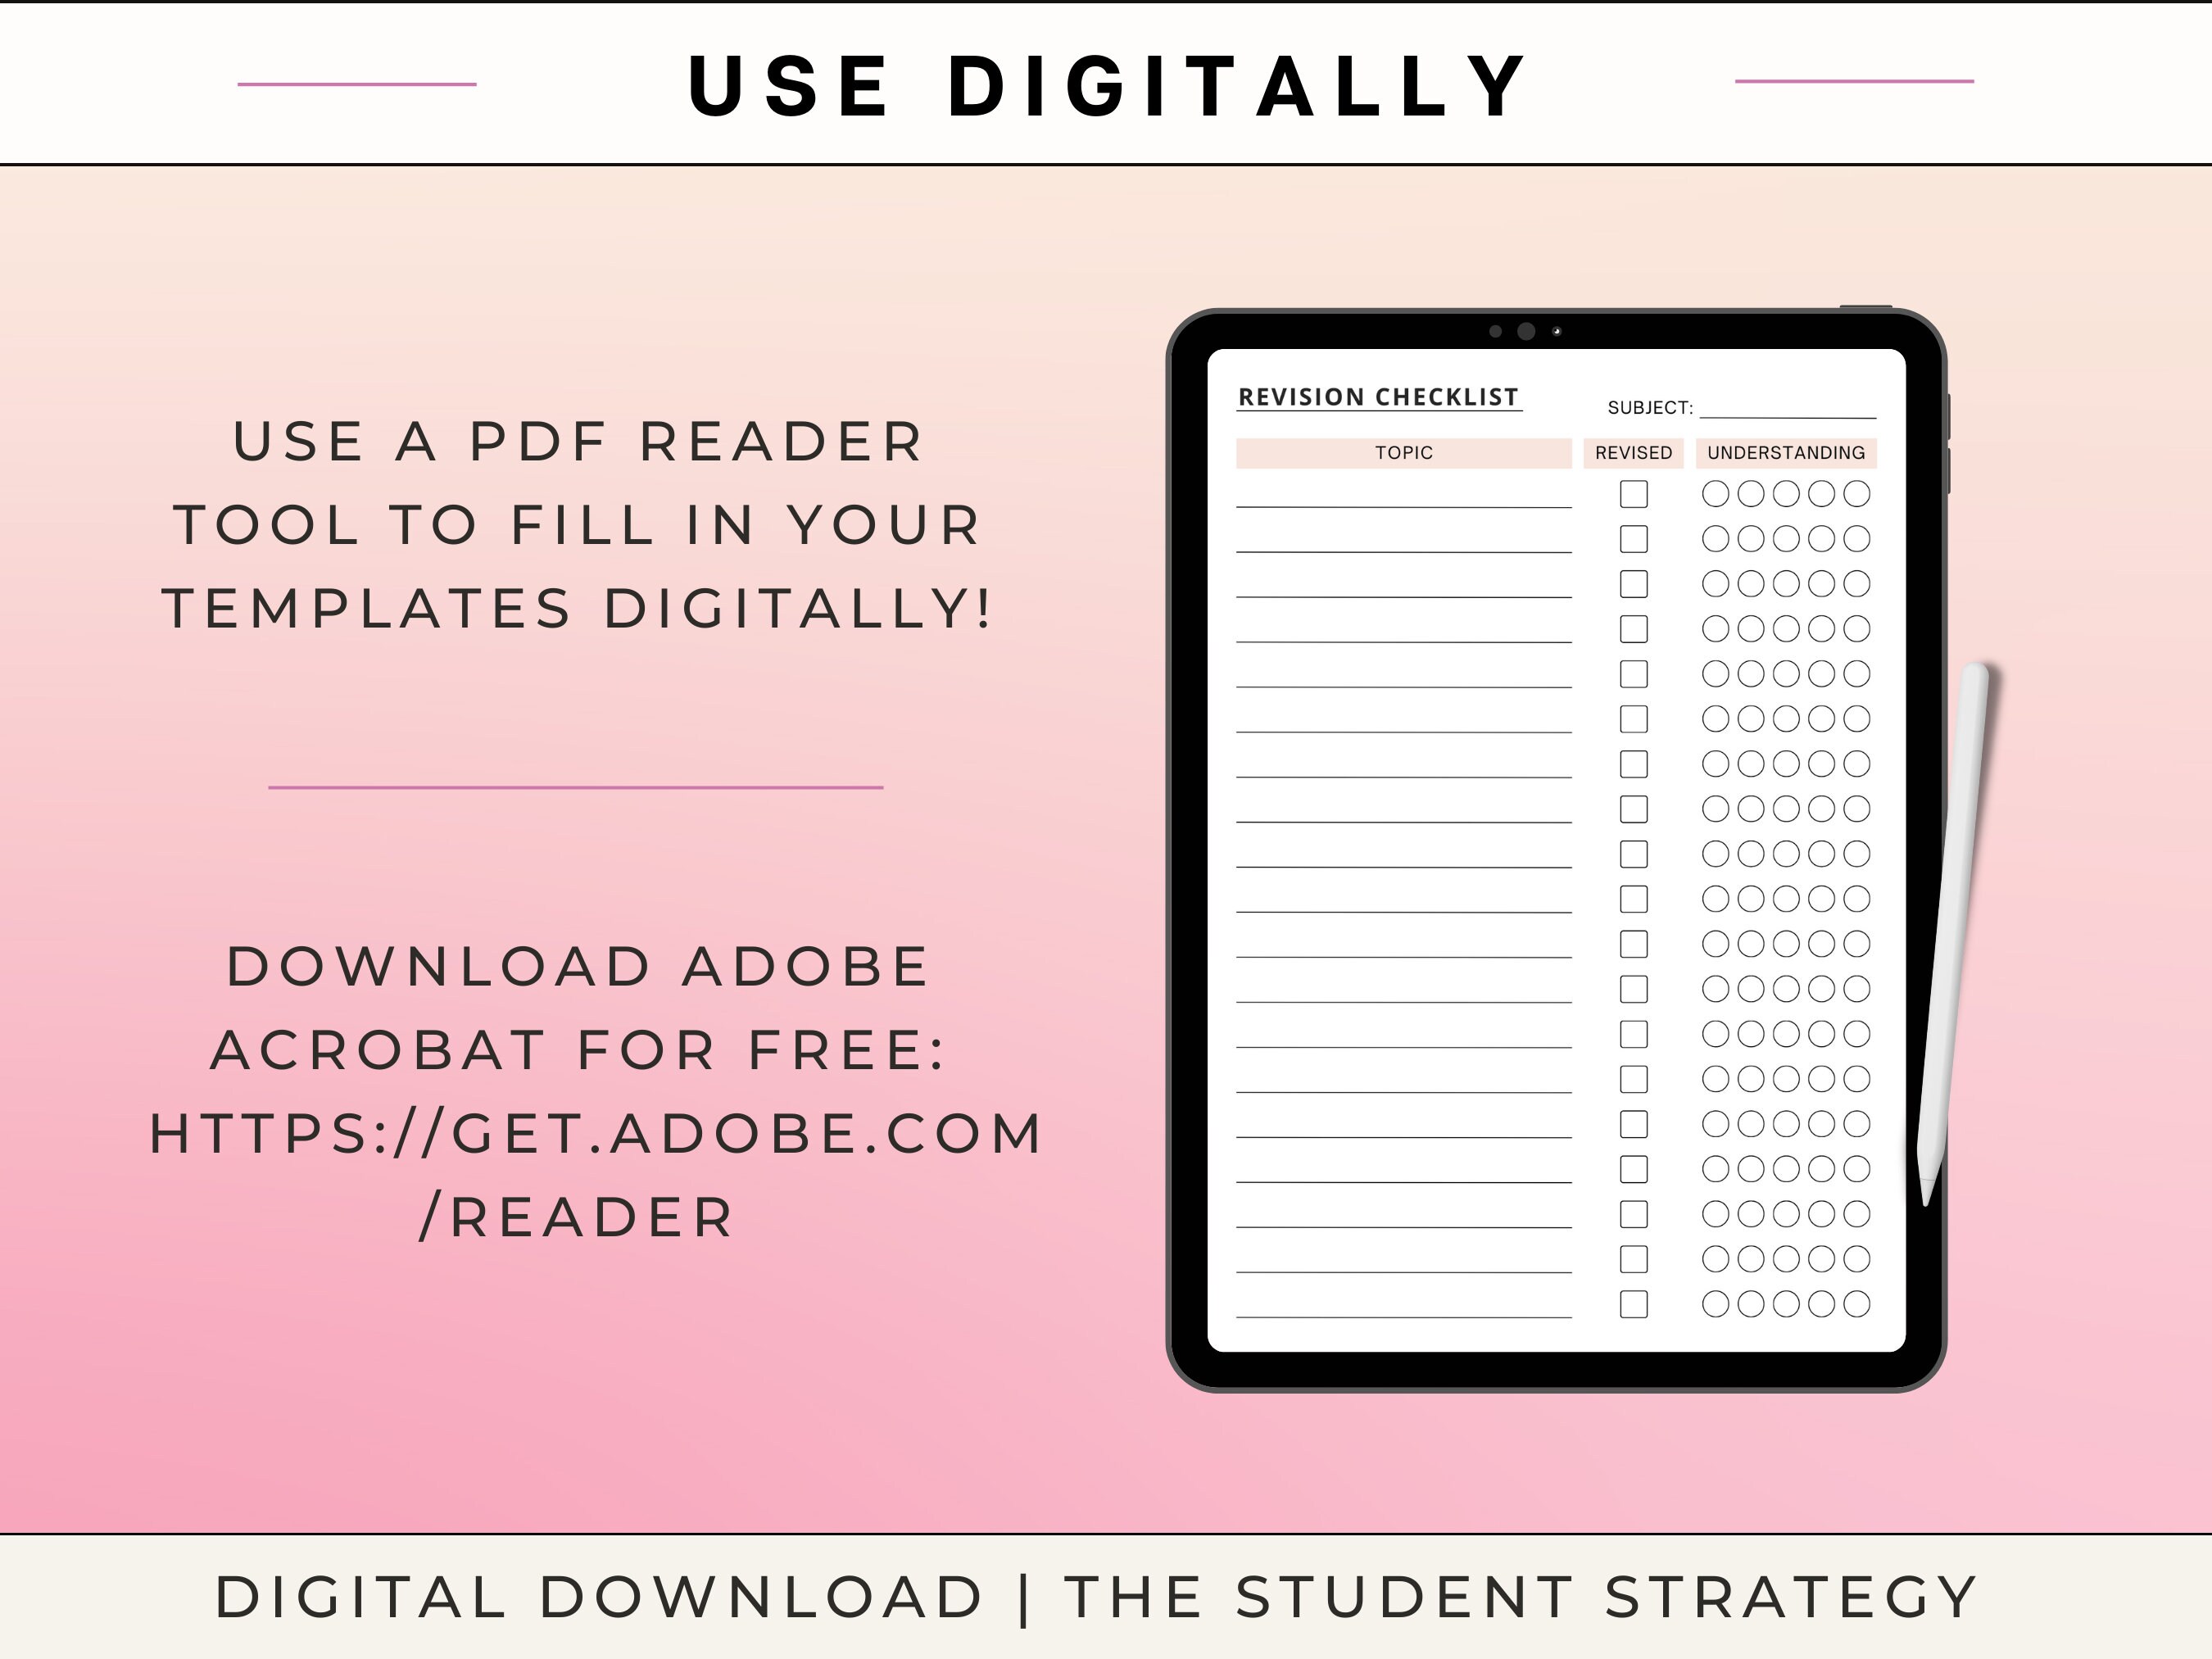 Digital Books and Your Rights: A Checklist for Readers